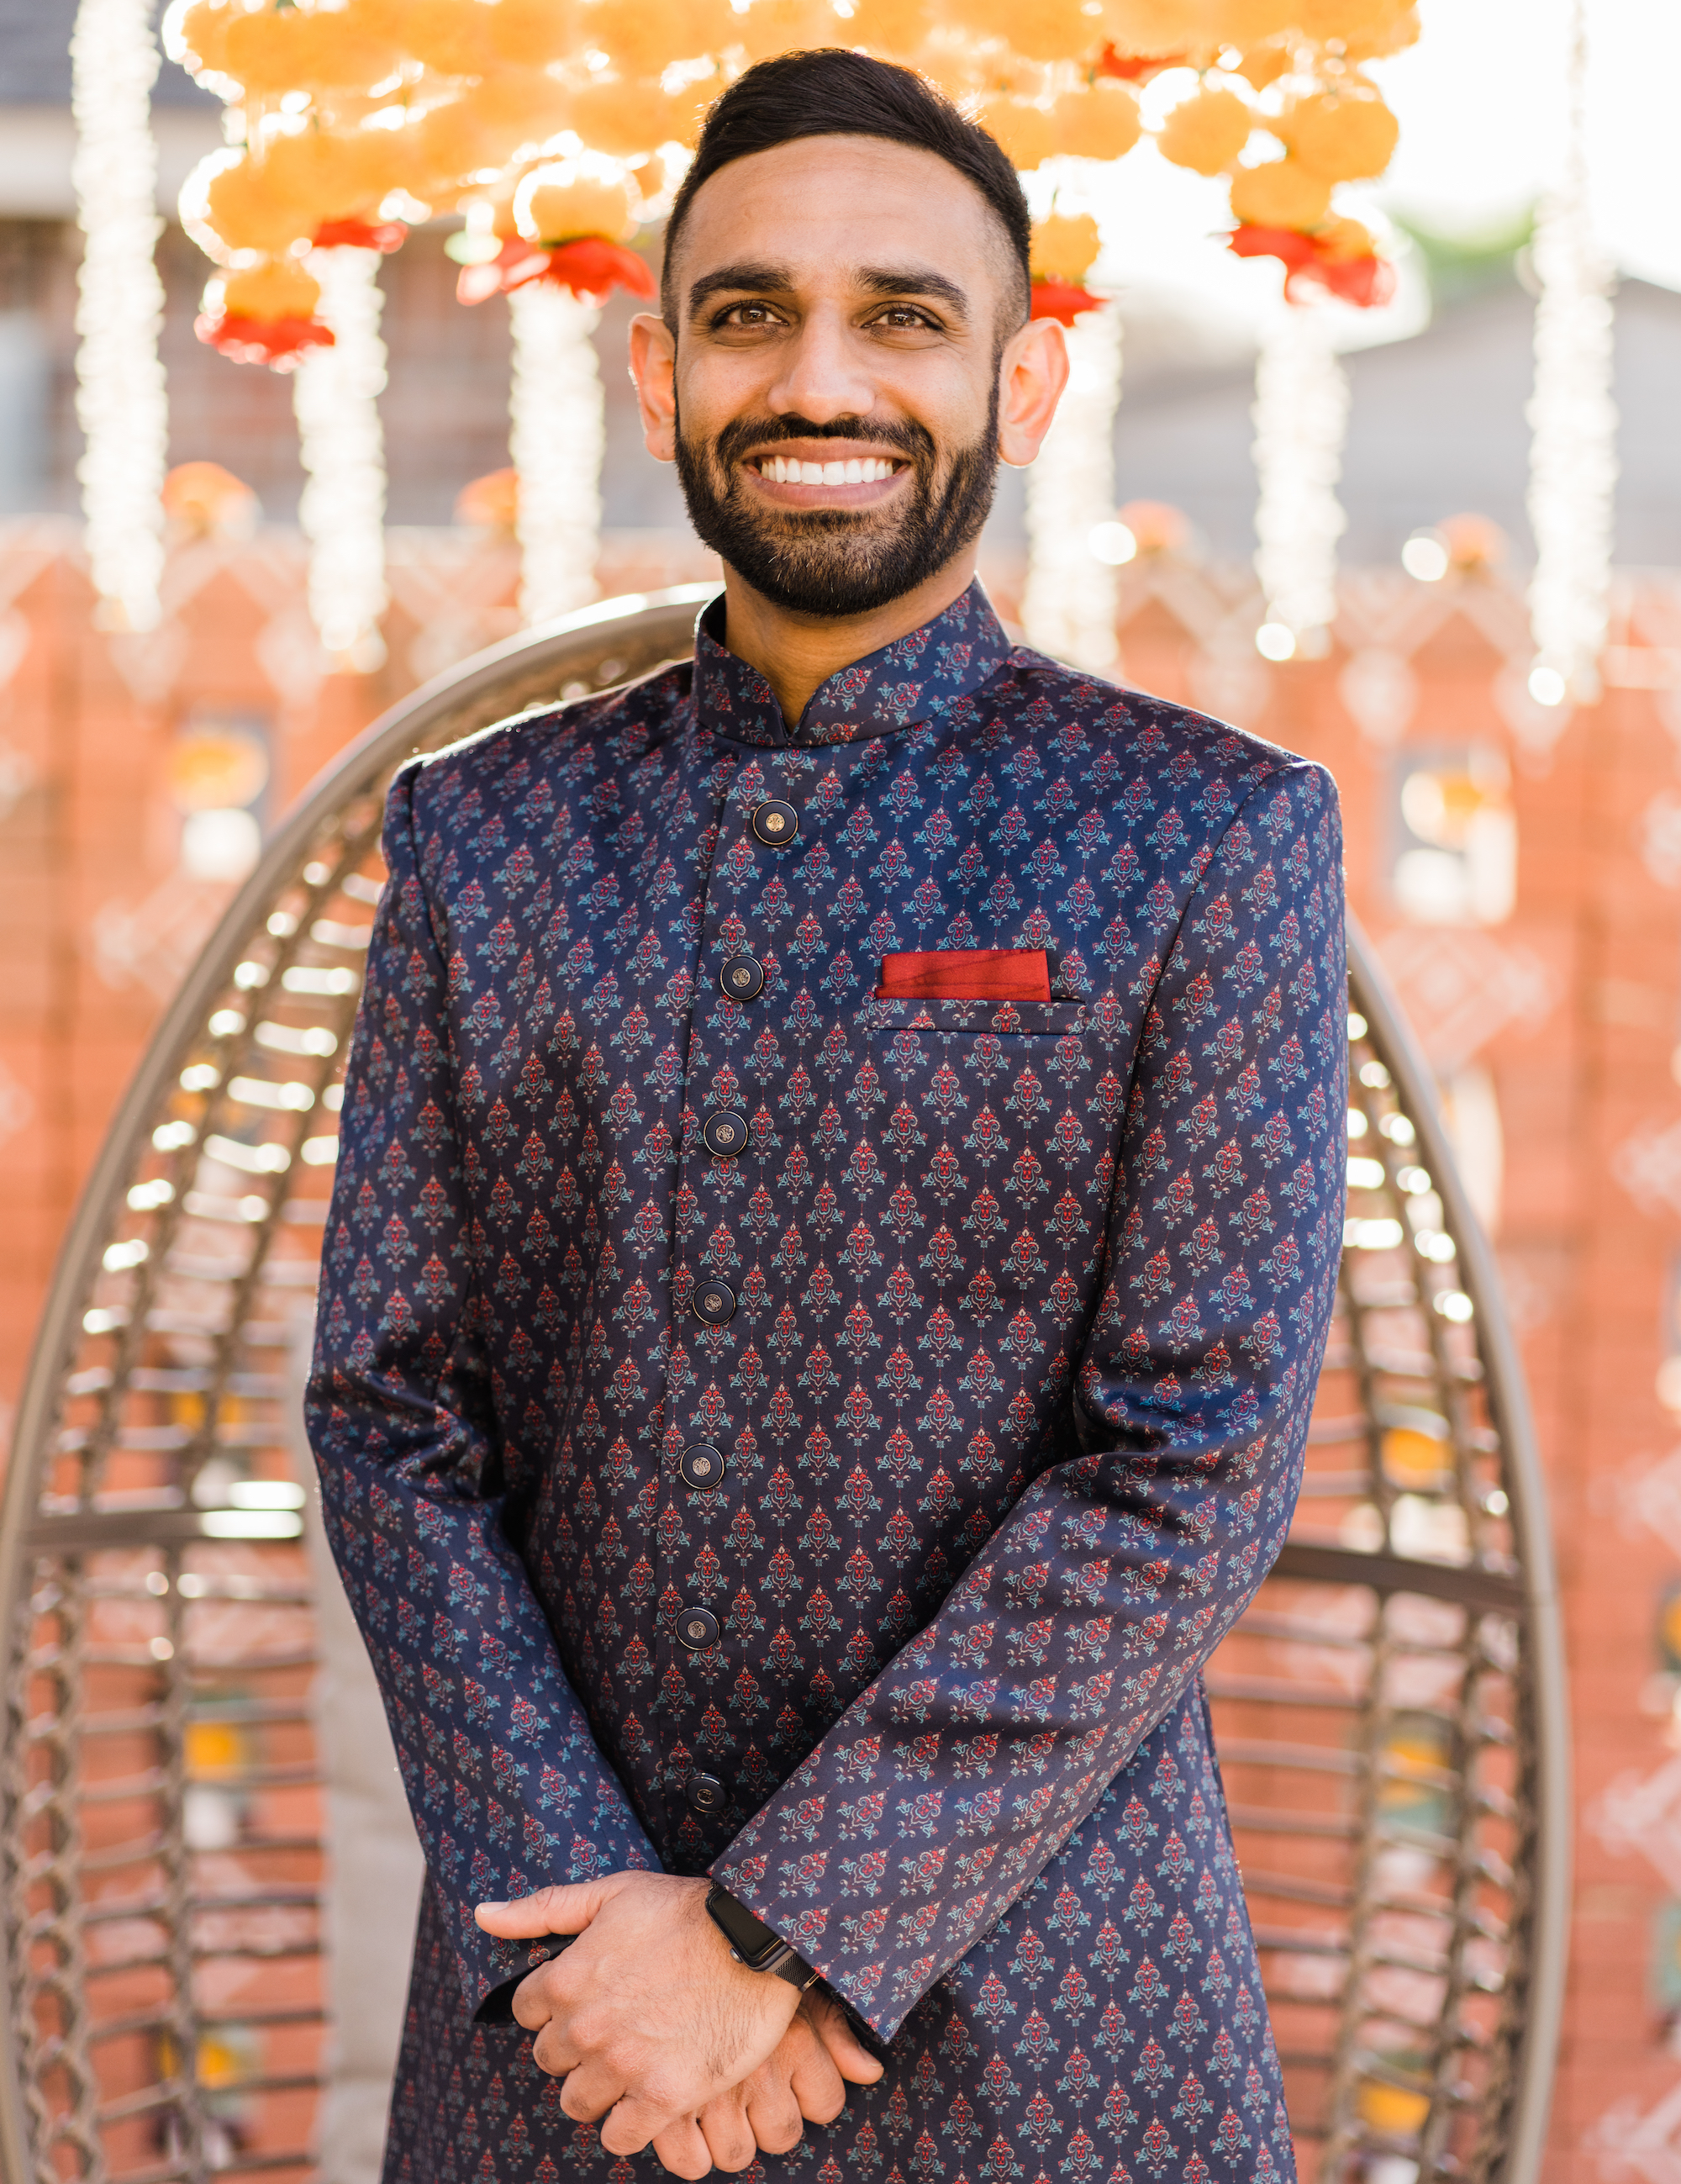 The groom smiles while wearing his traditional Indian wedding attire for a Hindu ceremony. 